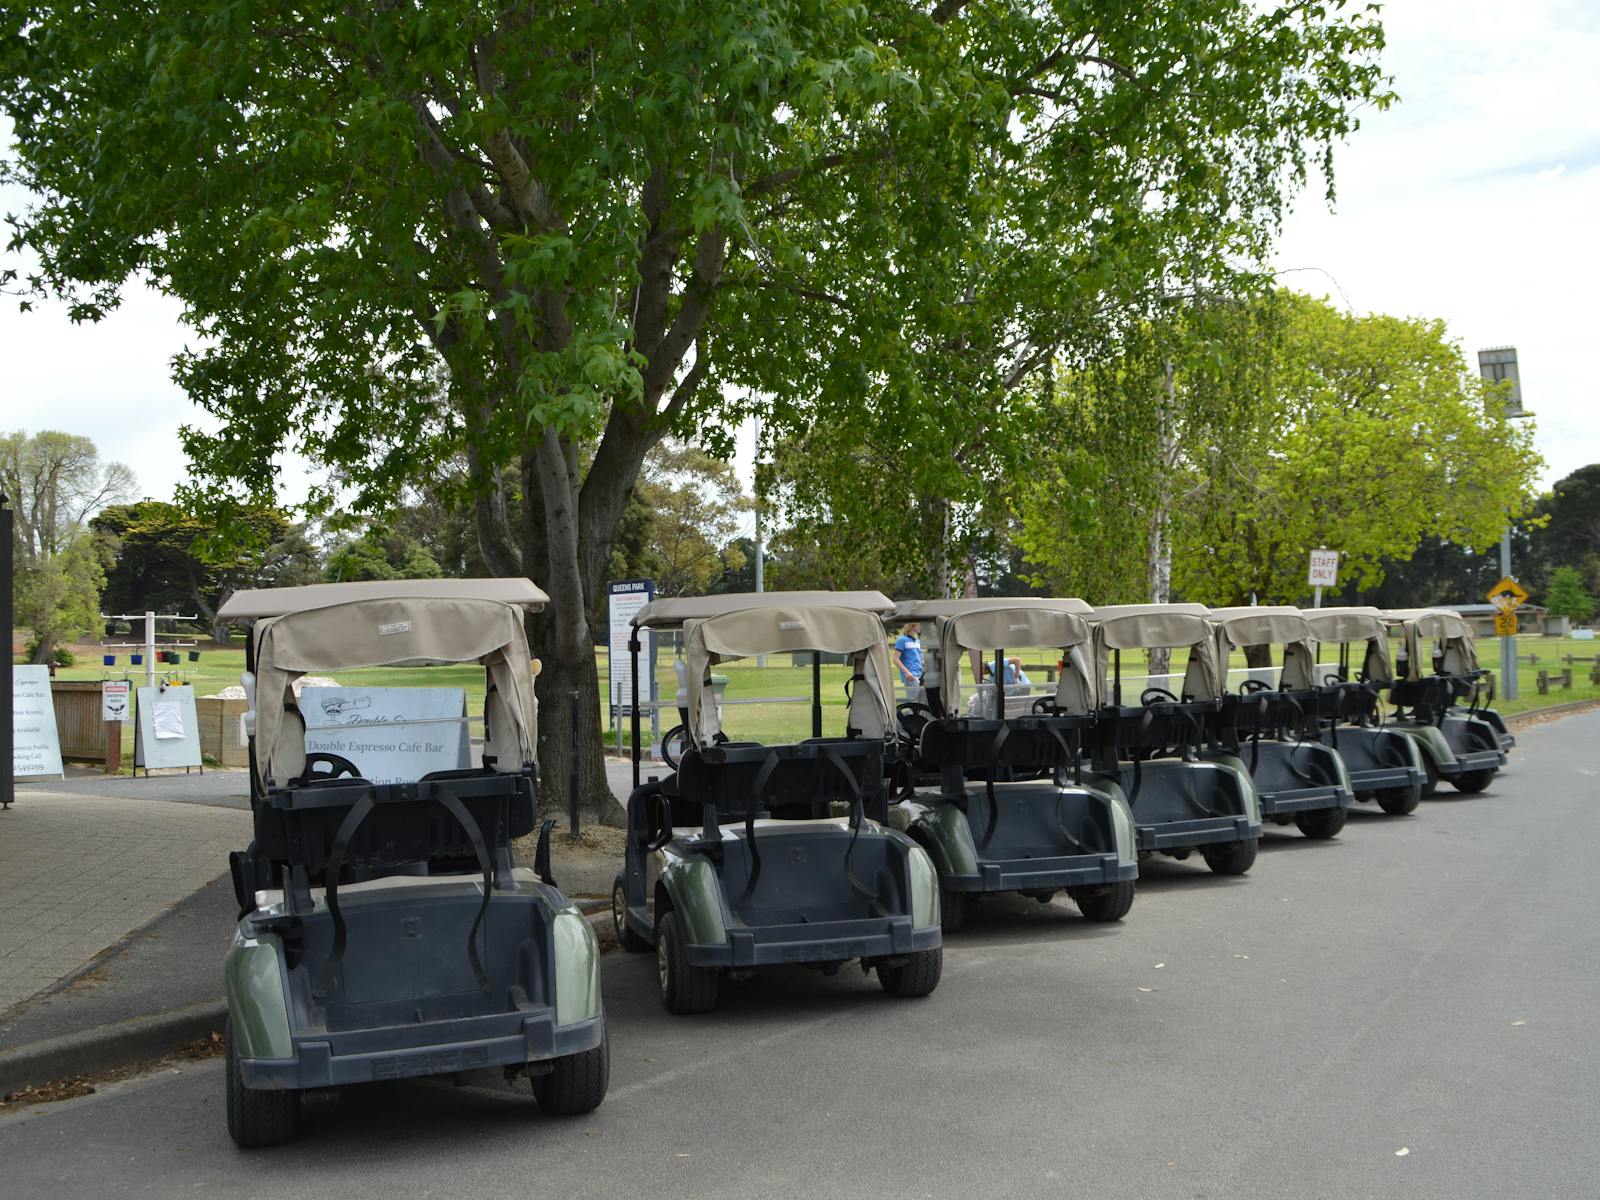 A line of golf carts sitting alongside the road availbale for hire